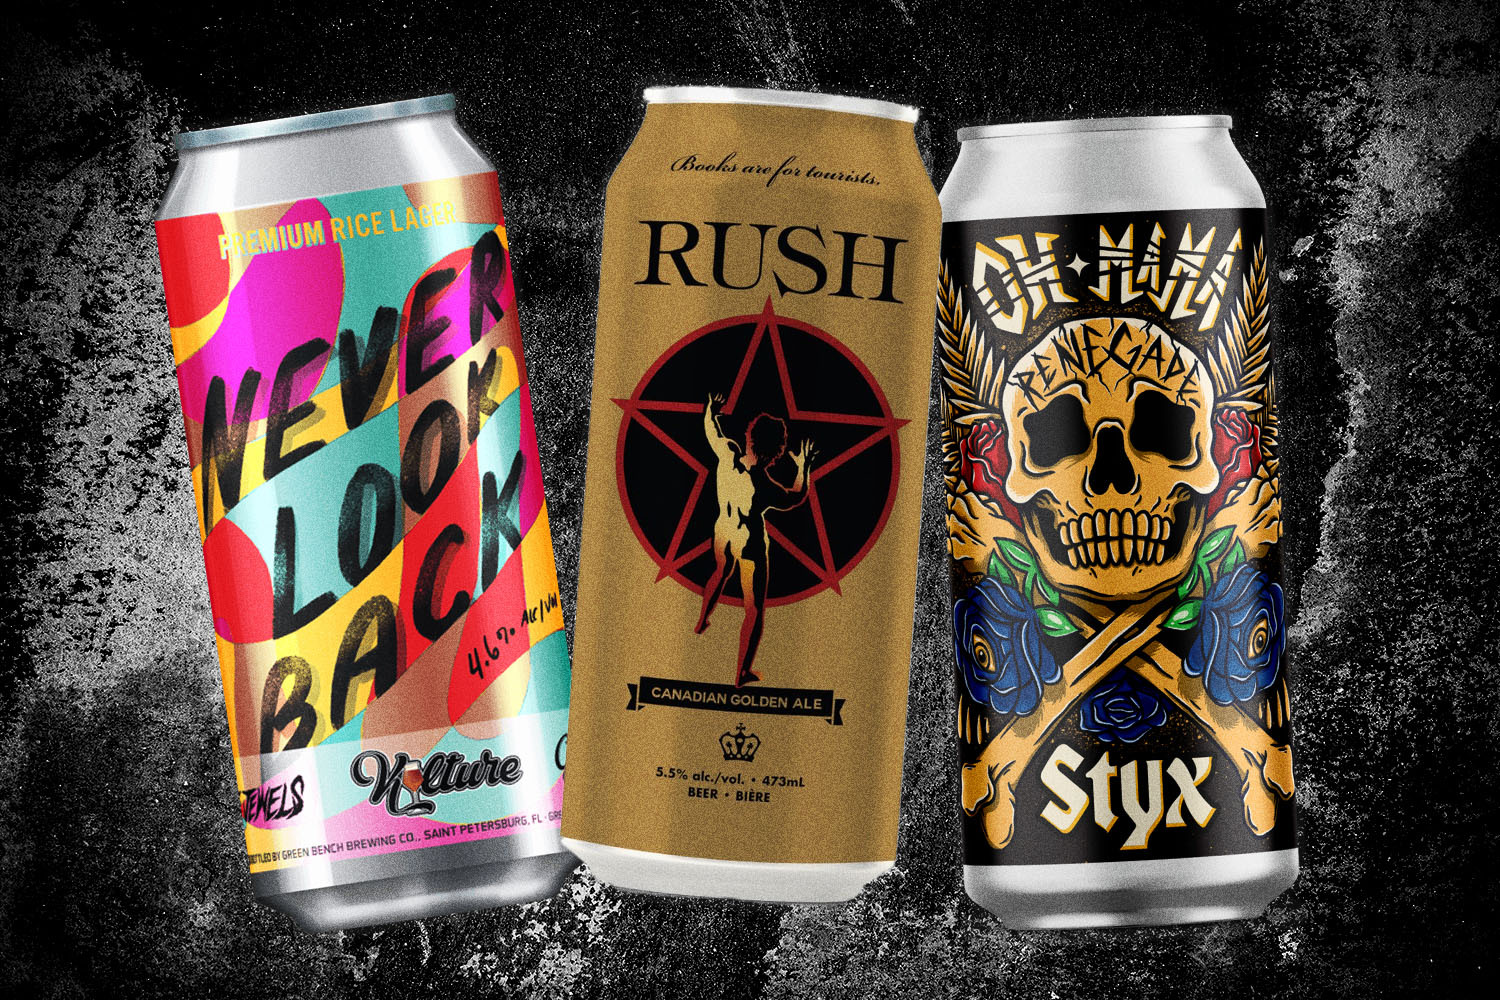 Run the Jewels, Rush and Styx are just some of the bands with their own brews.